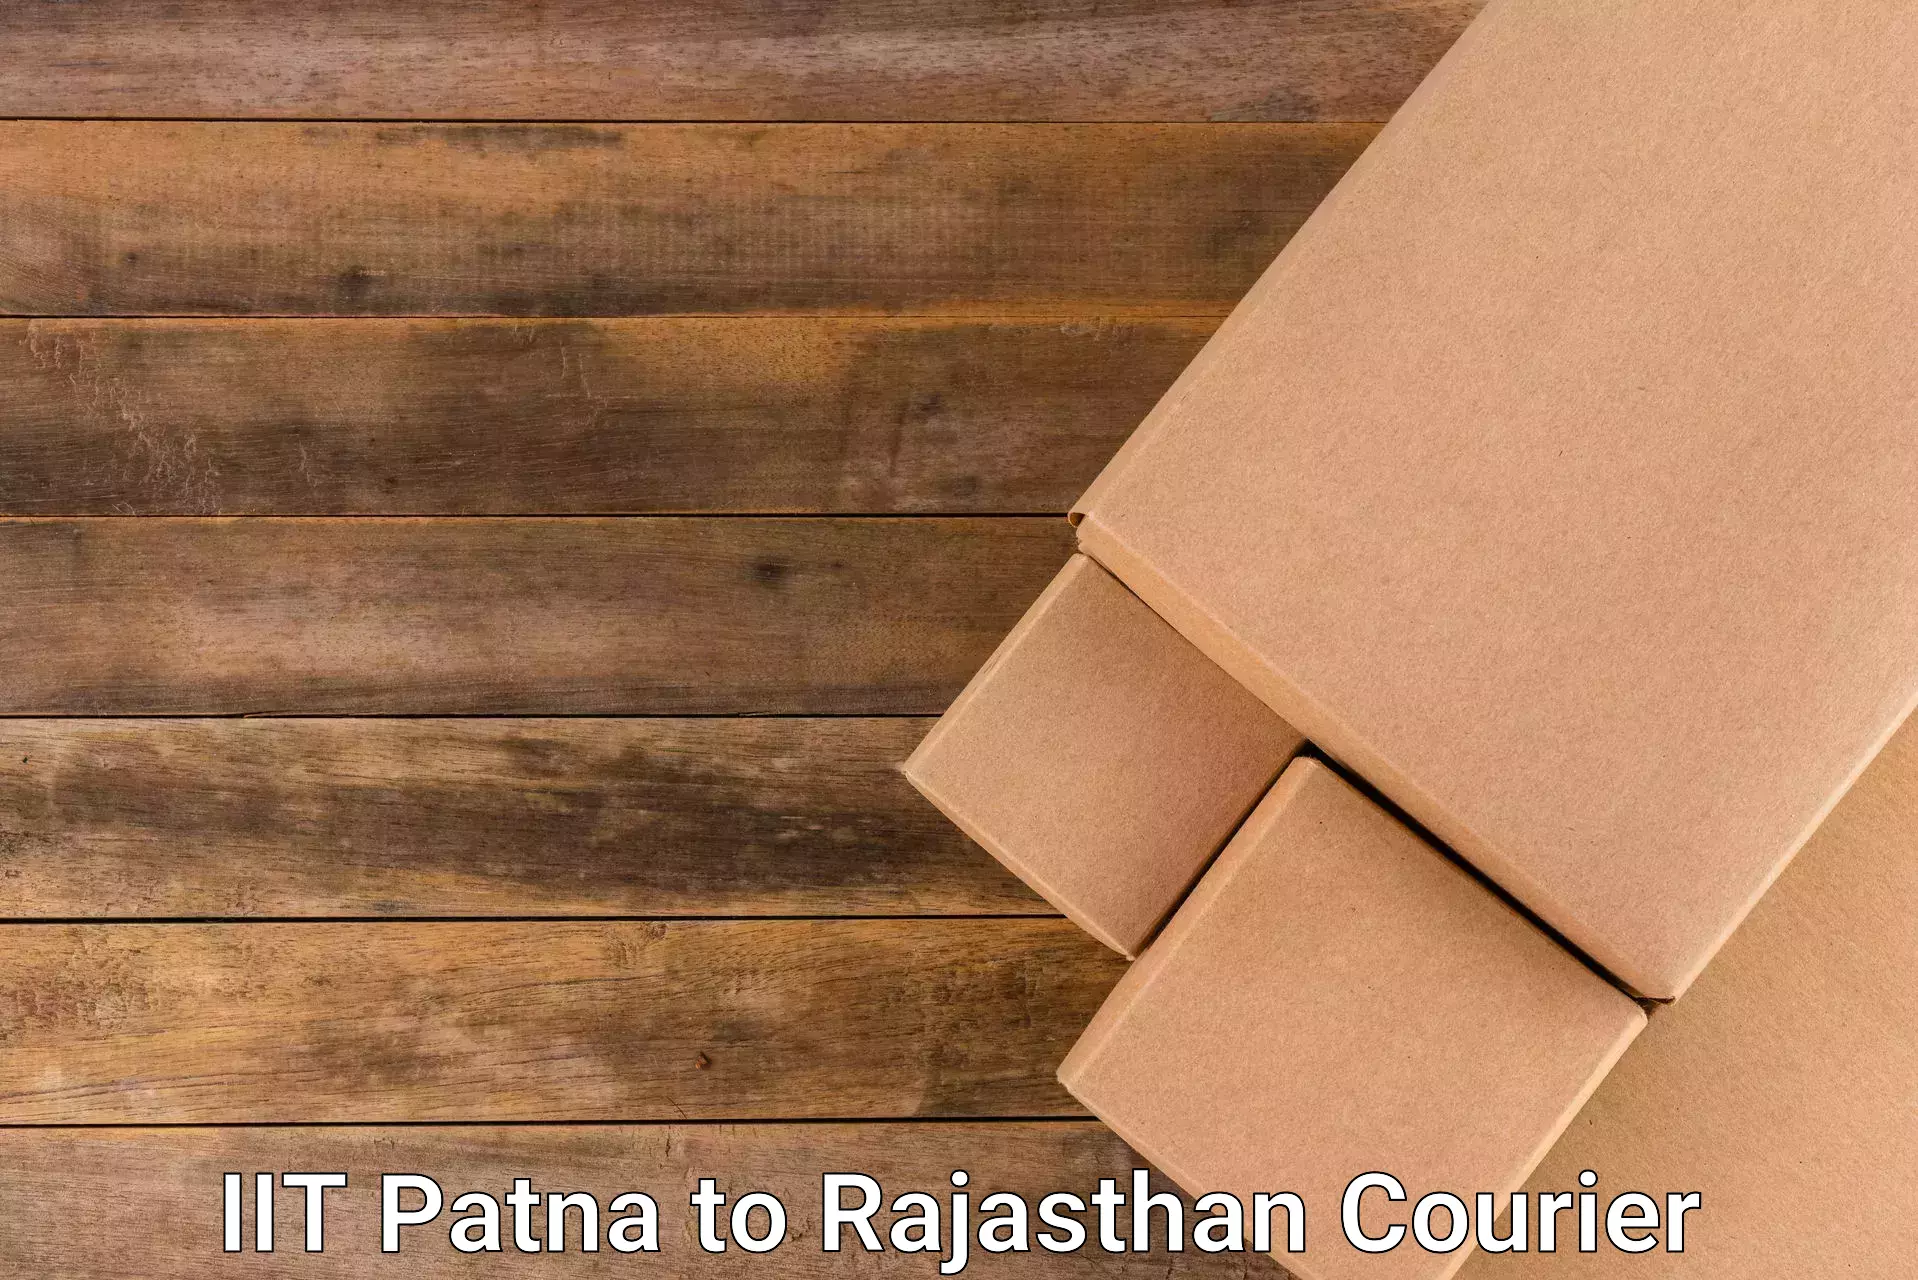 Courier service comparison IIT Patna to Sultana